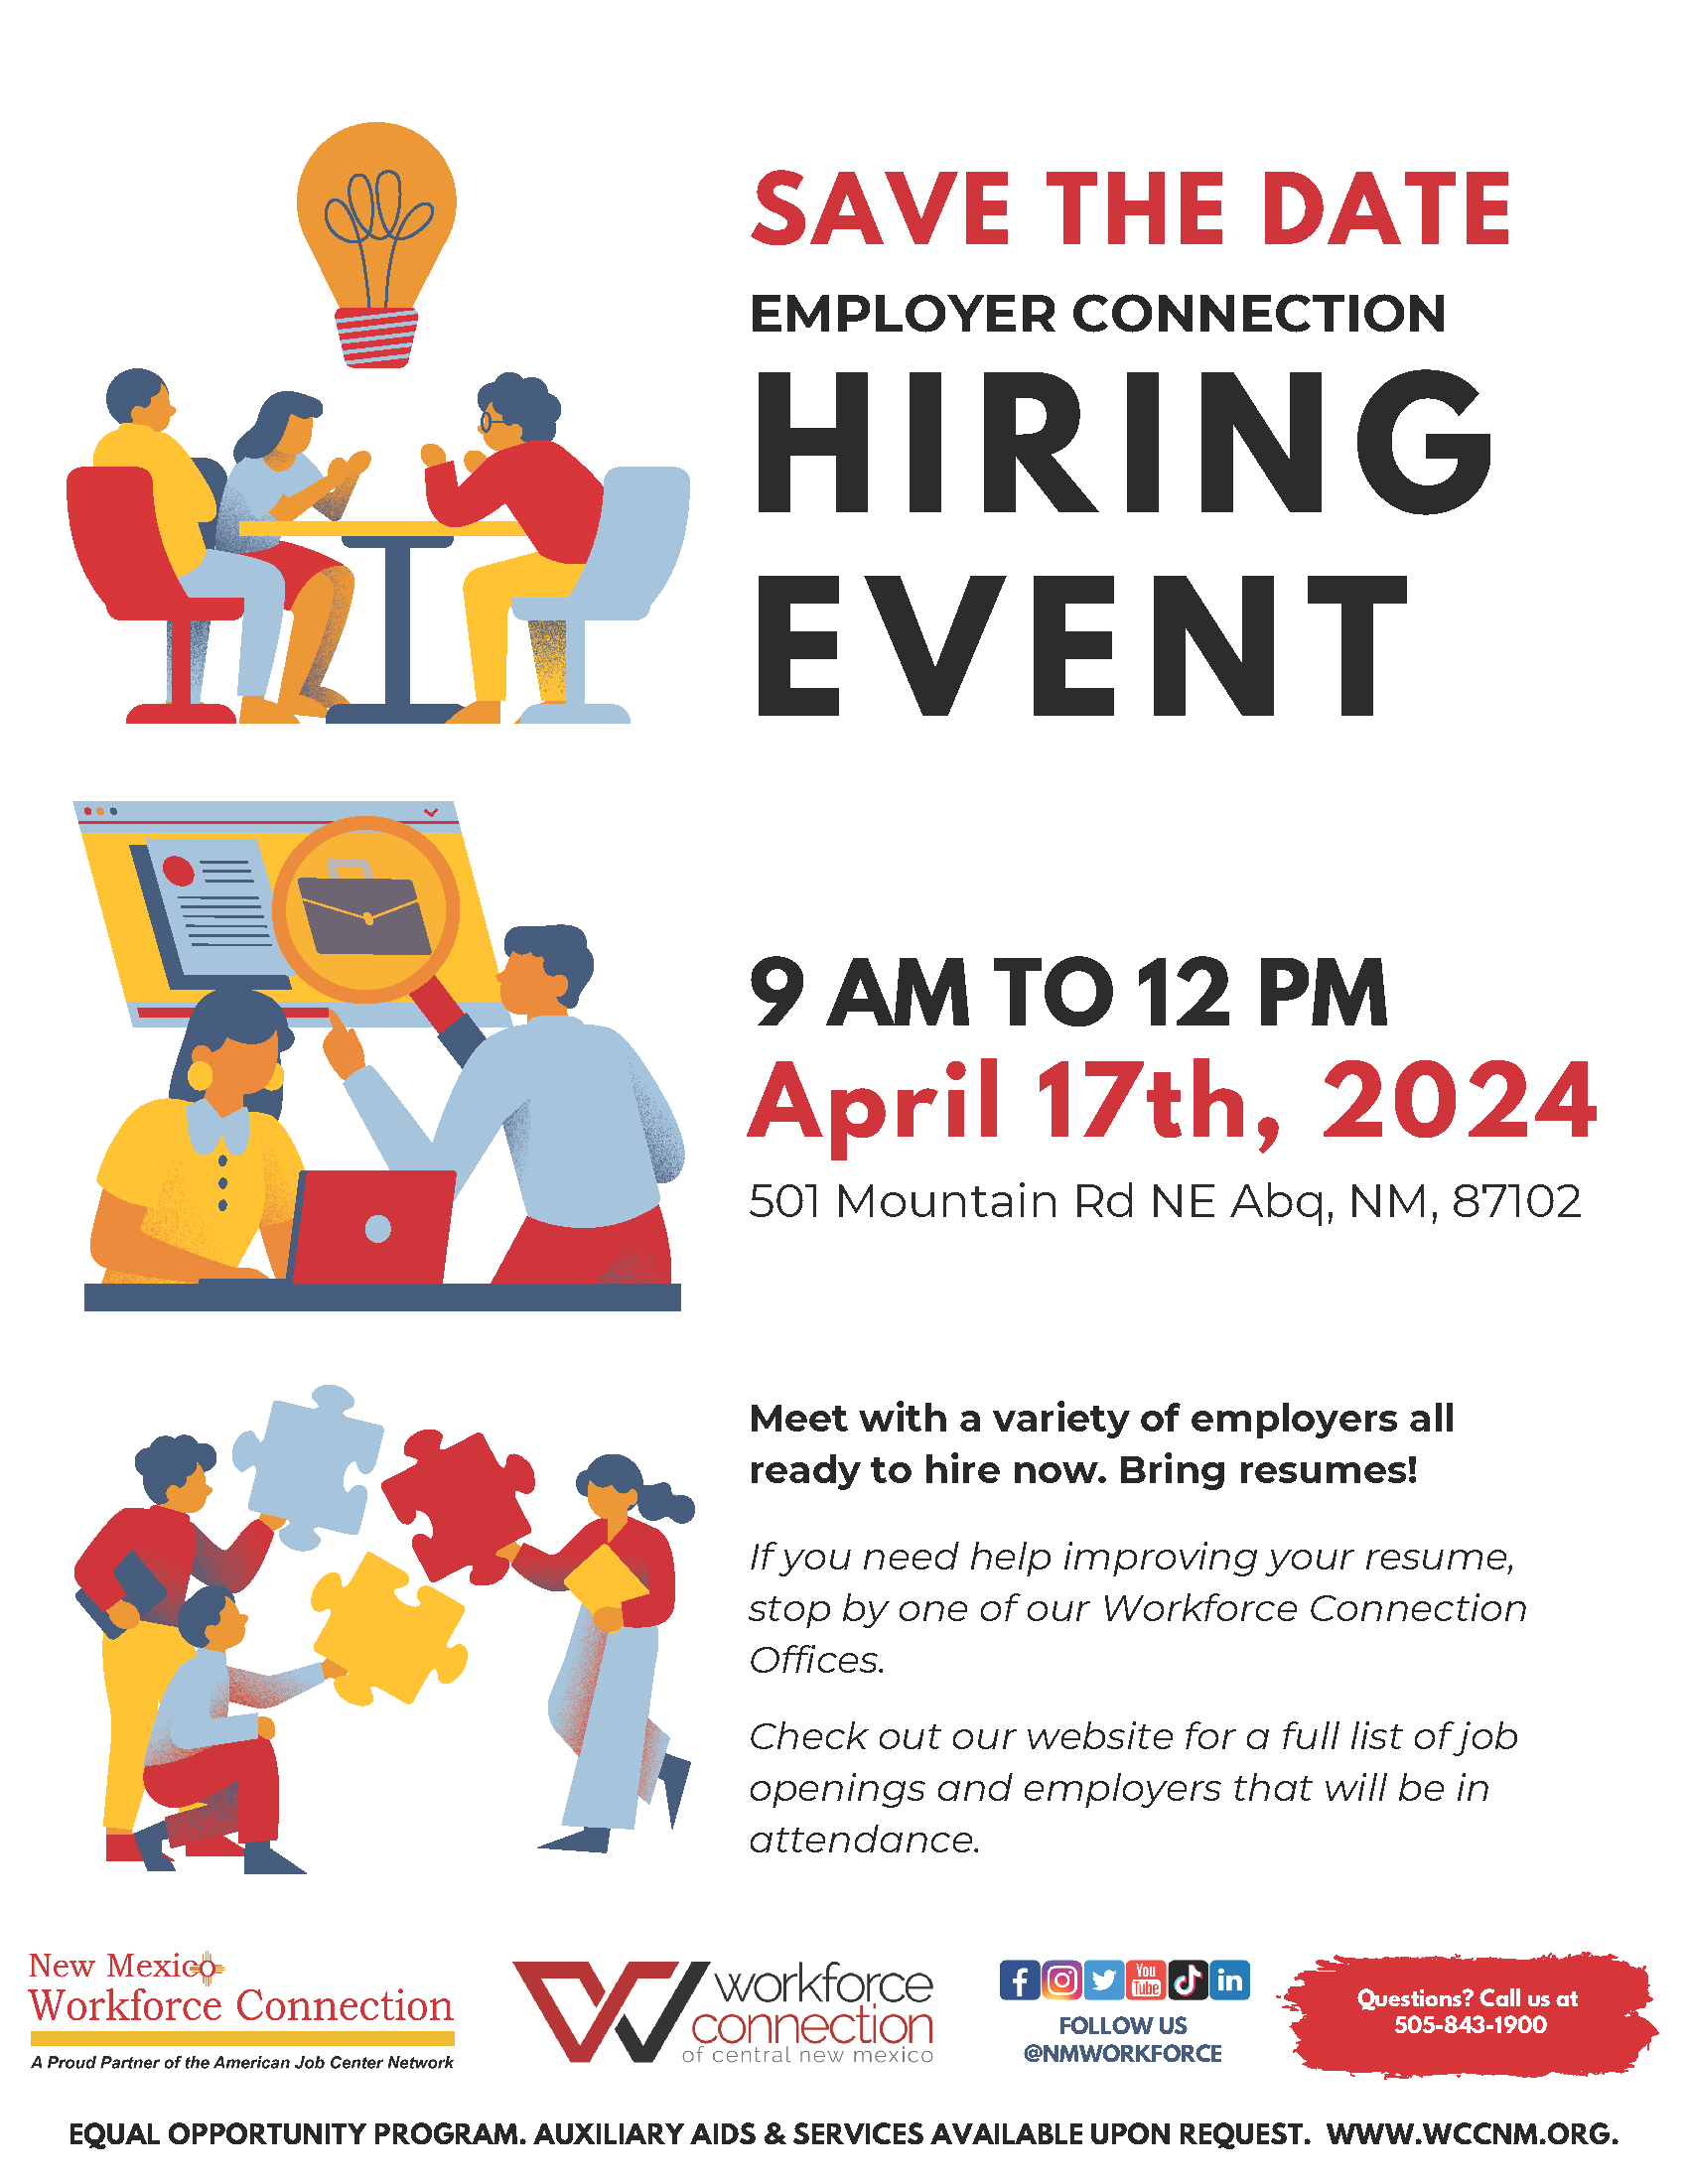 Save the Date Employer Connection Hiring Event flyer